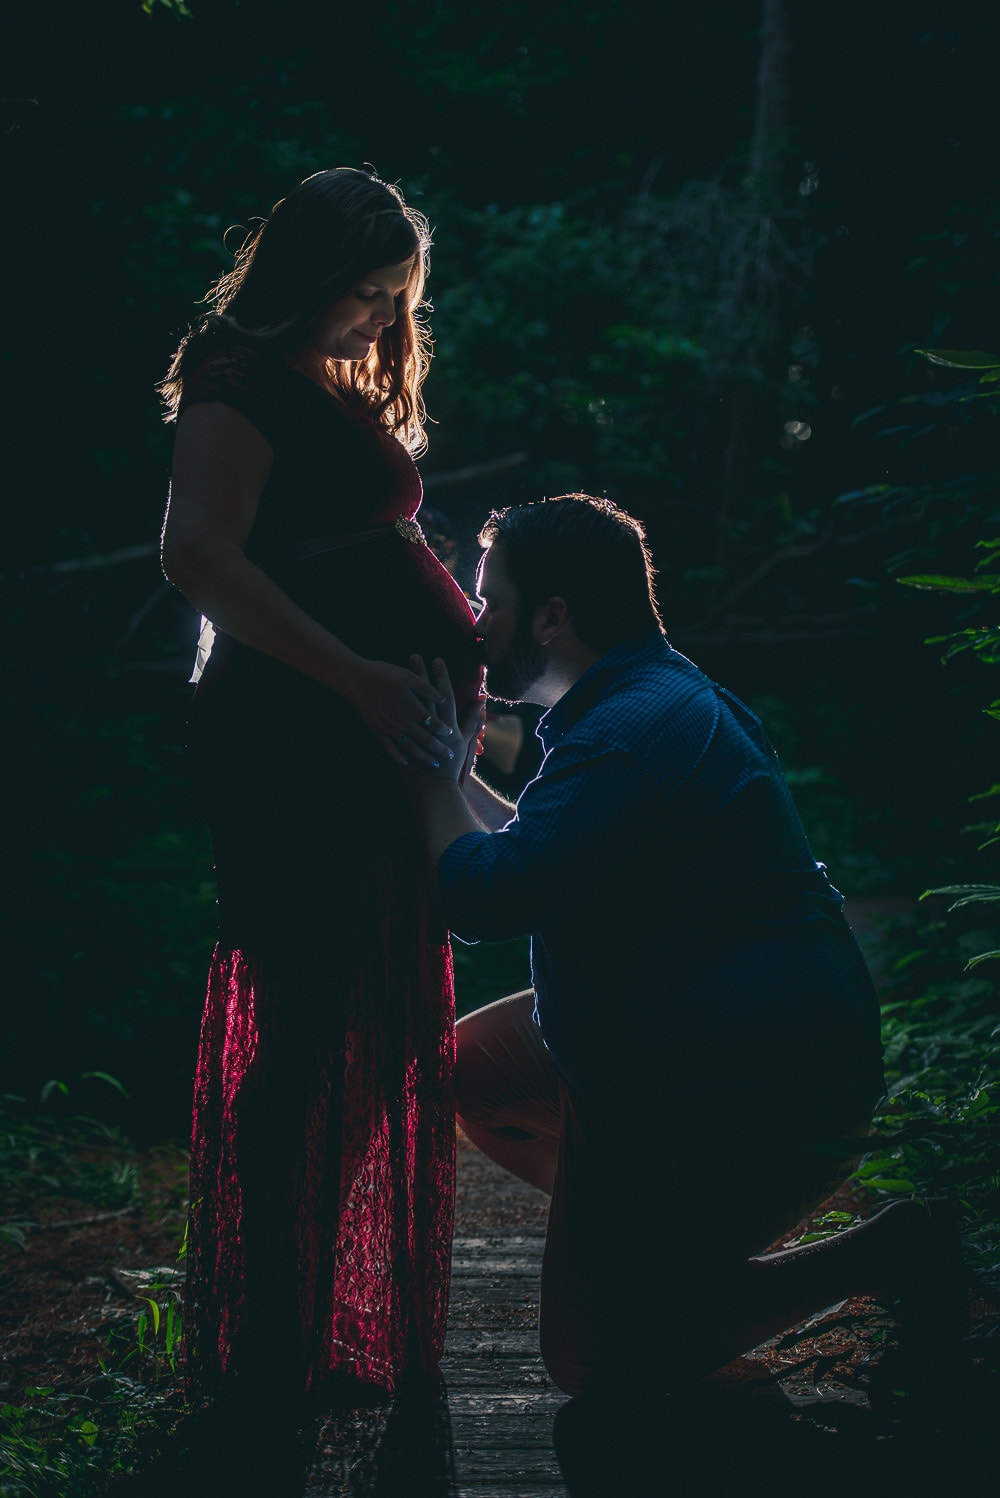 nighttime maternity photography in London Ontario